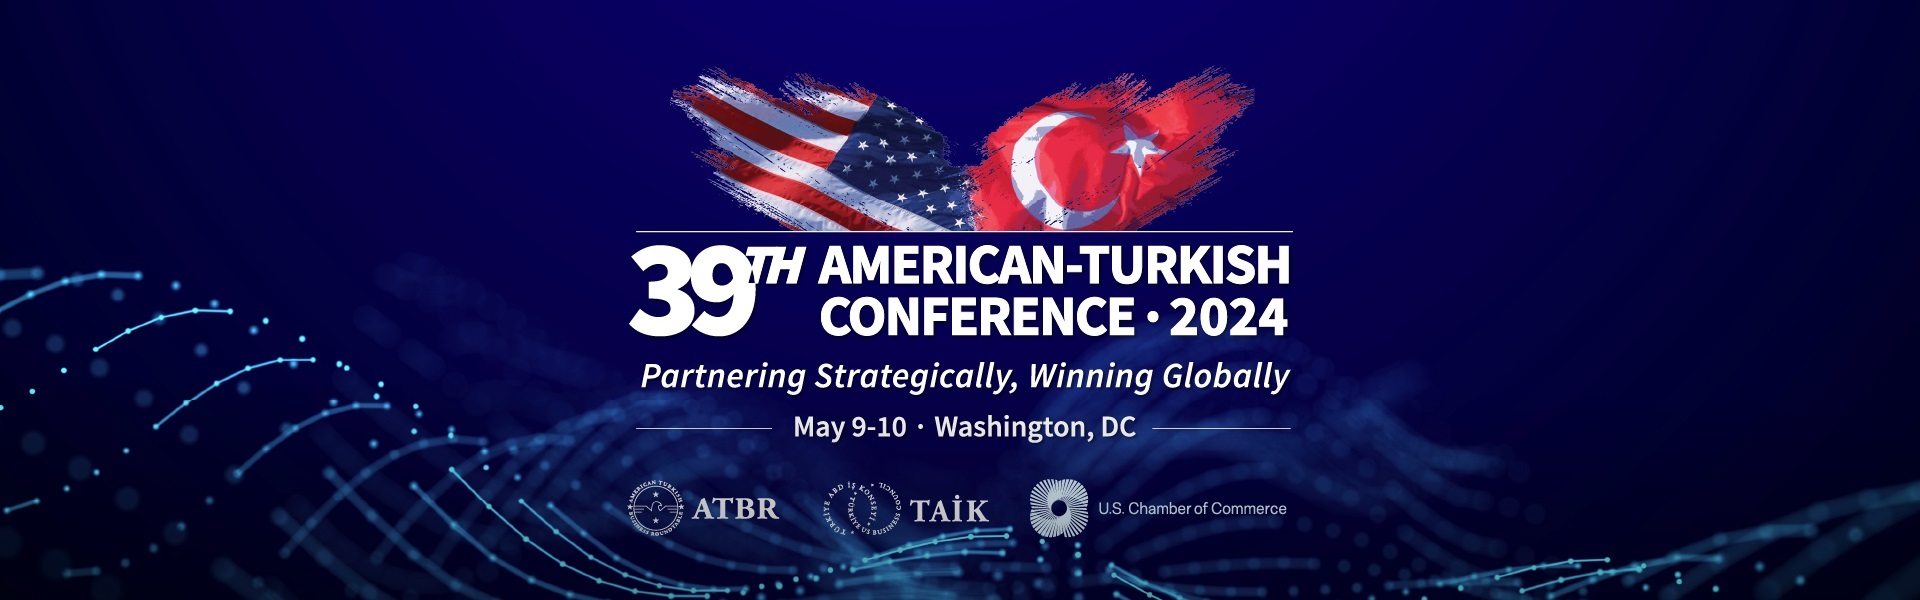 39th American - Turkish Conference - 2024